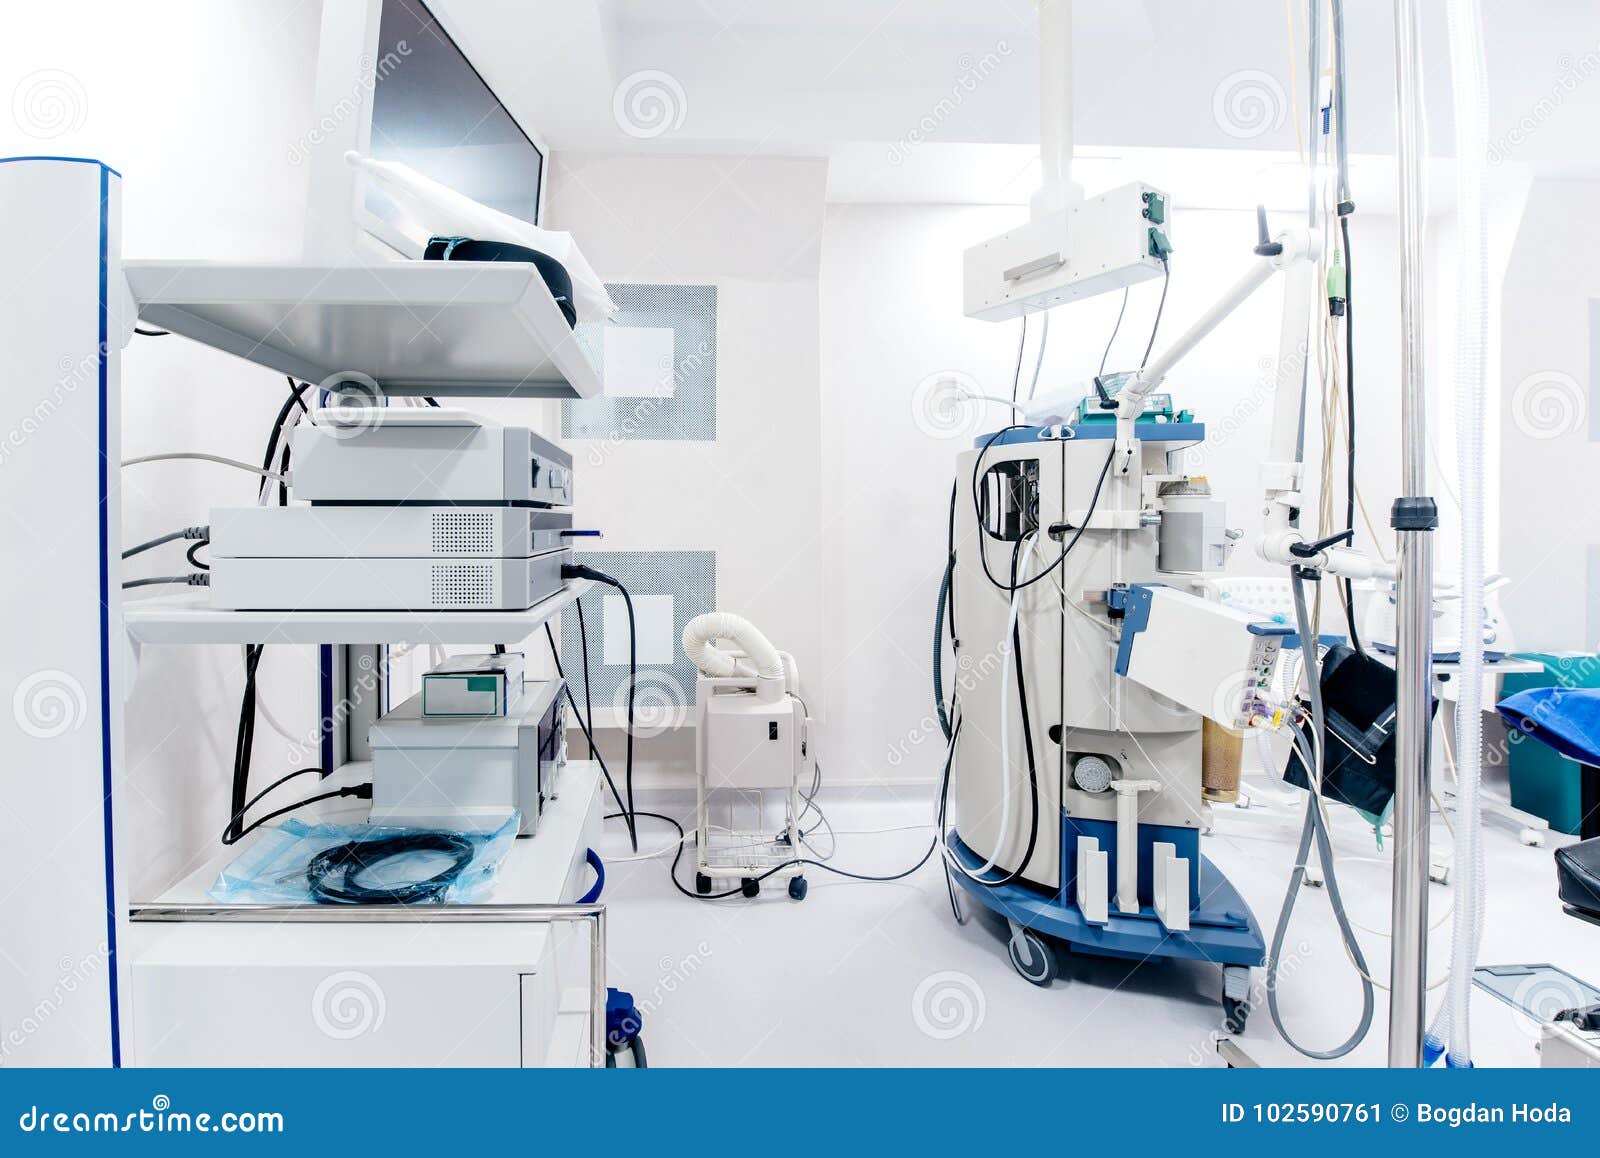 close up details of hospital operating room interior. medical devices and life support monitors